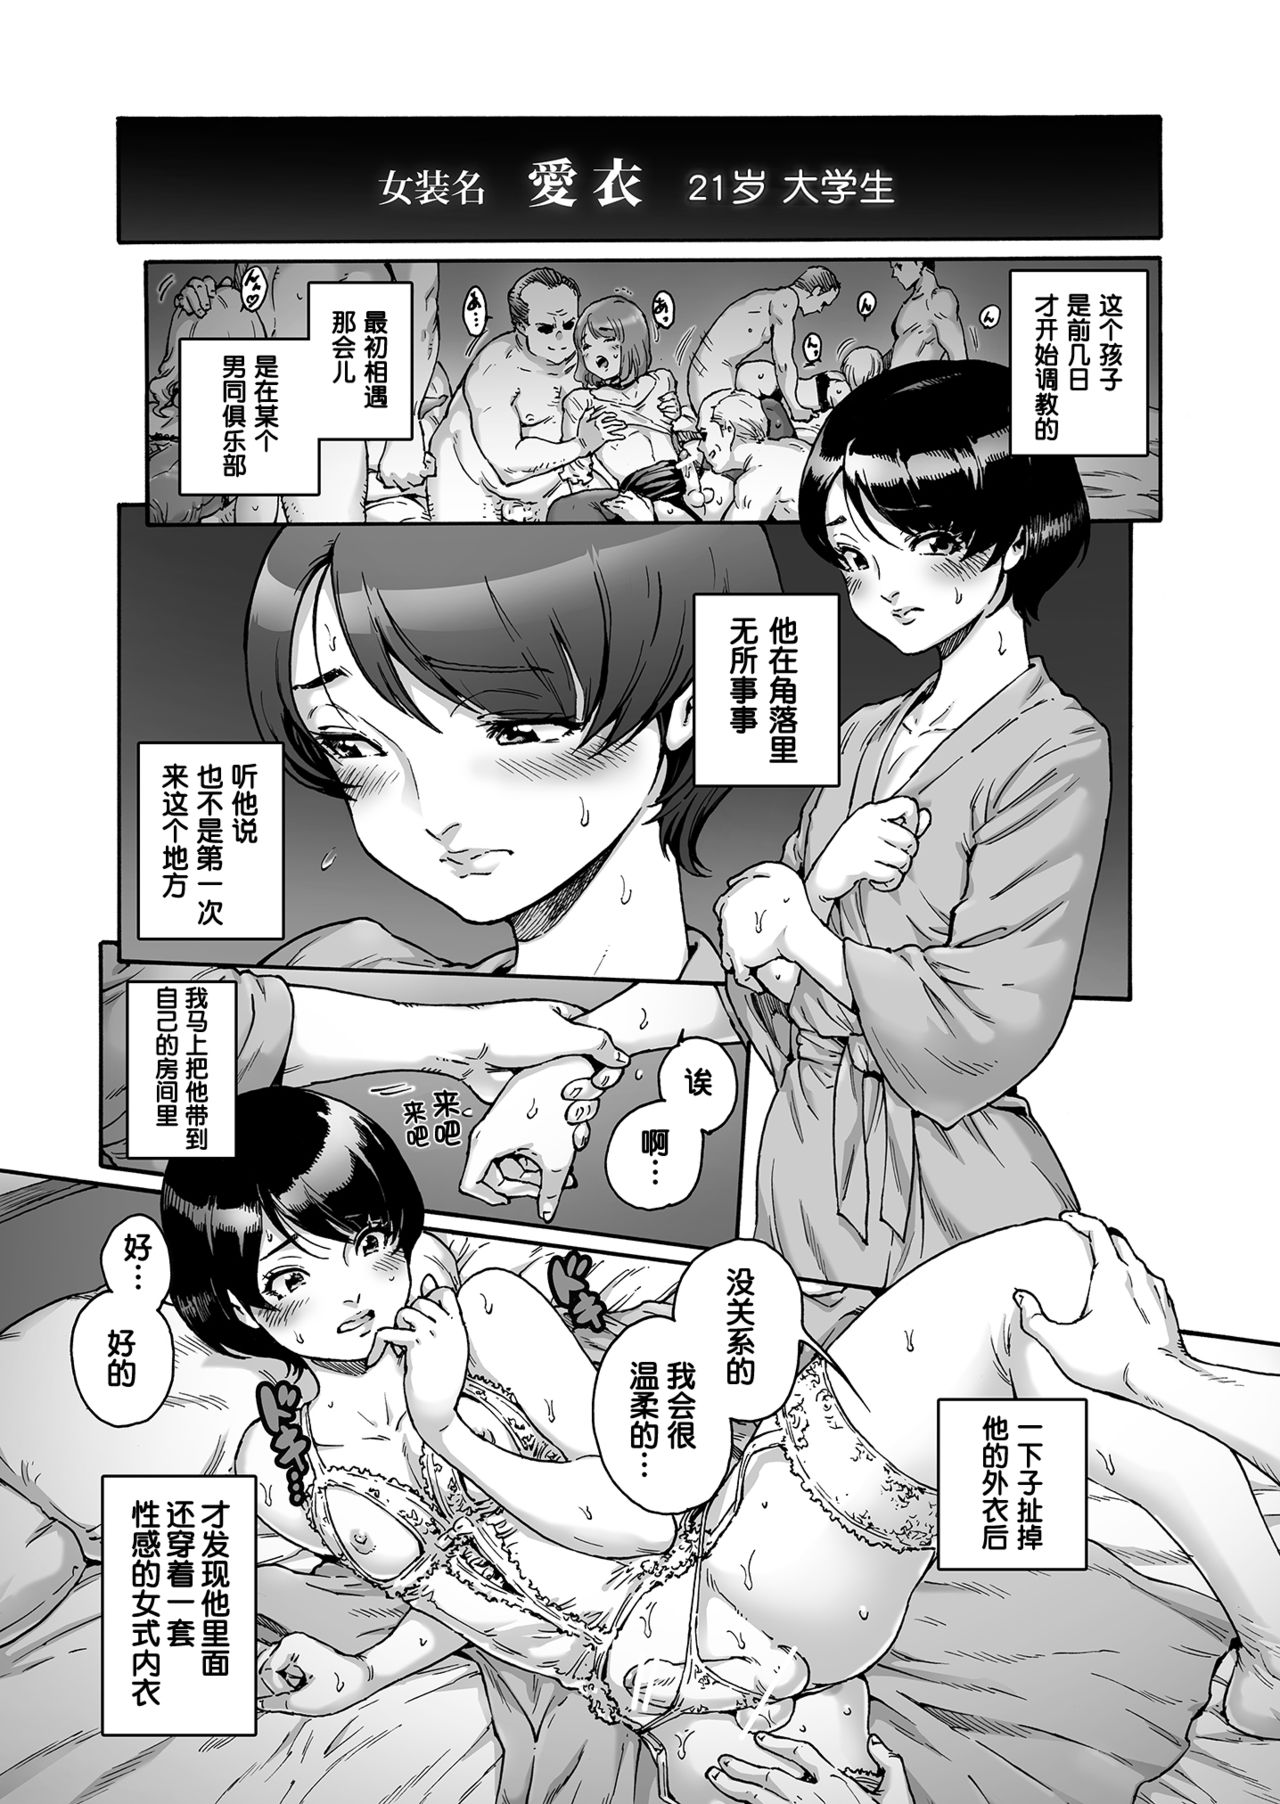 [Shotaian (Aian)] Appetizer. [Chinese] [鬼畜王汉化组] page 3 full